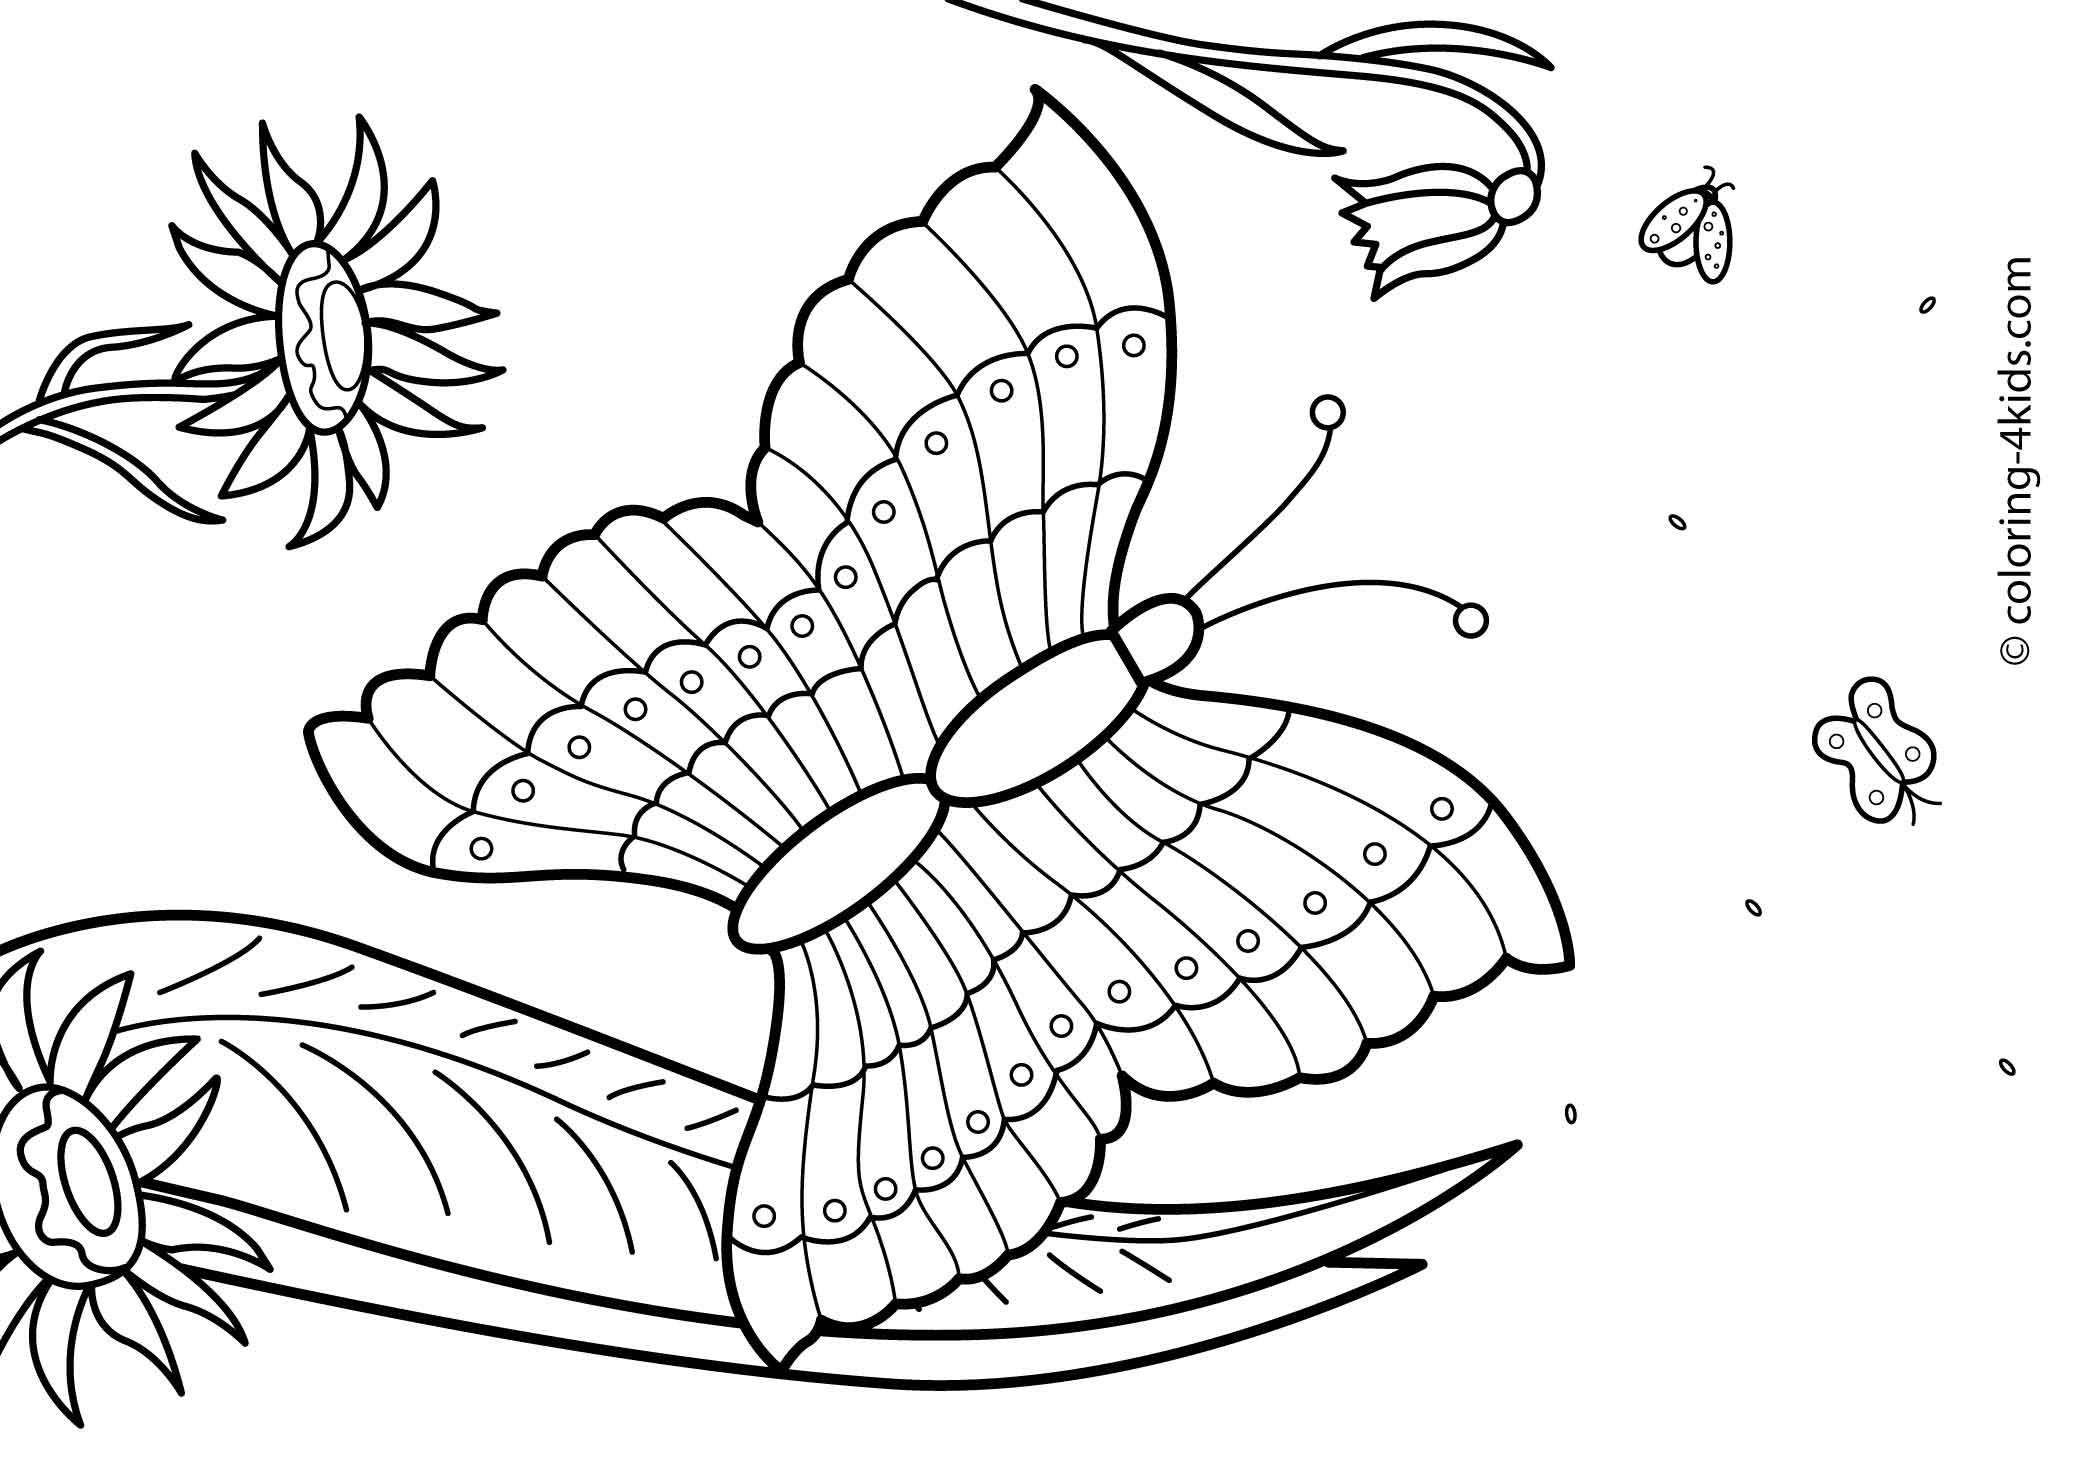 Summer Coloring Pages For Kids Printable
 27 Summer season coloring pages part 2